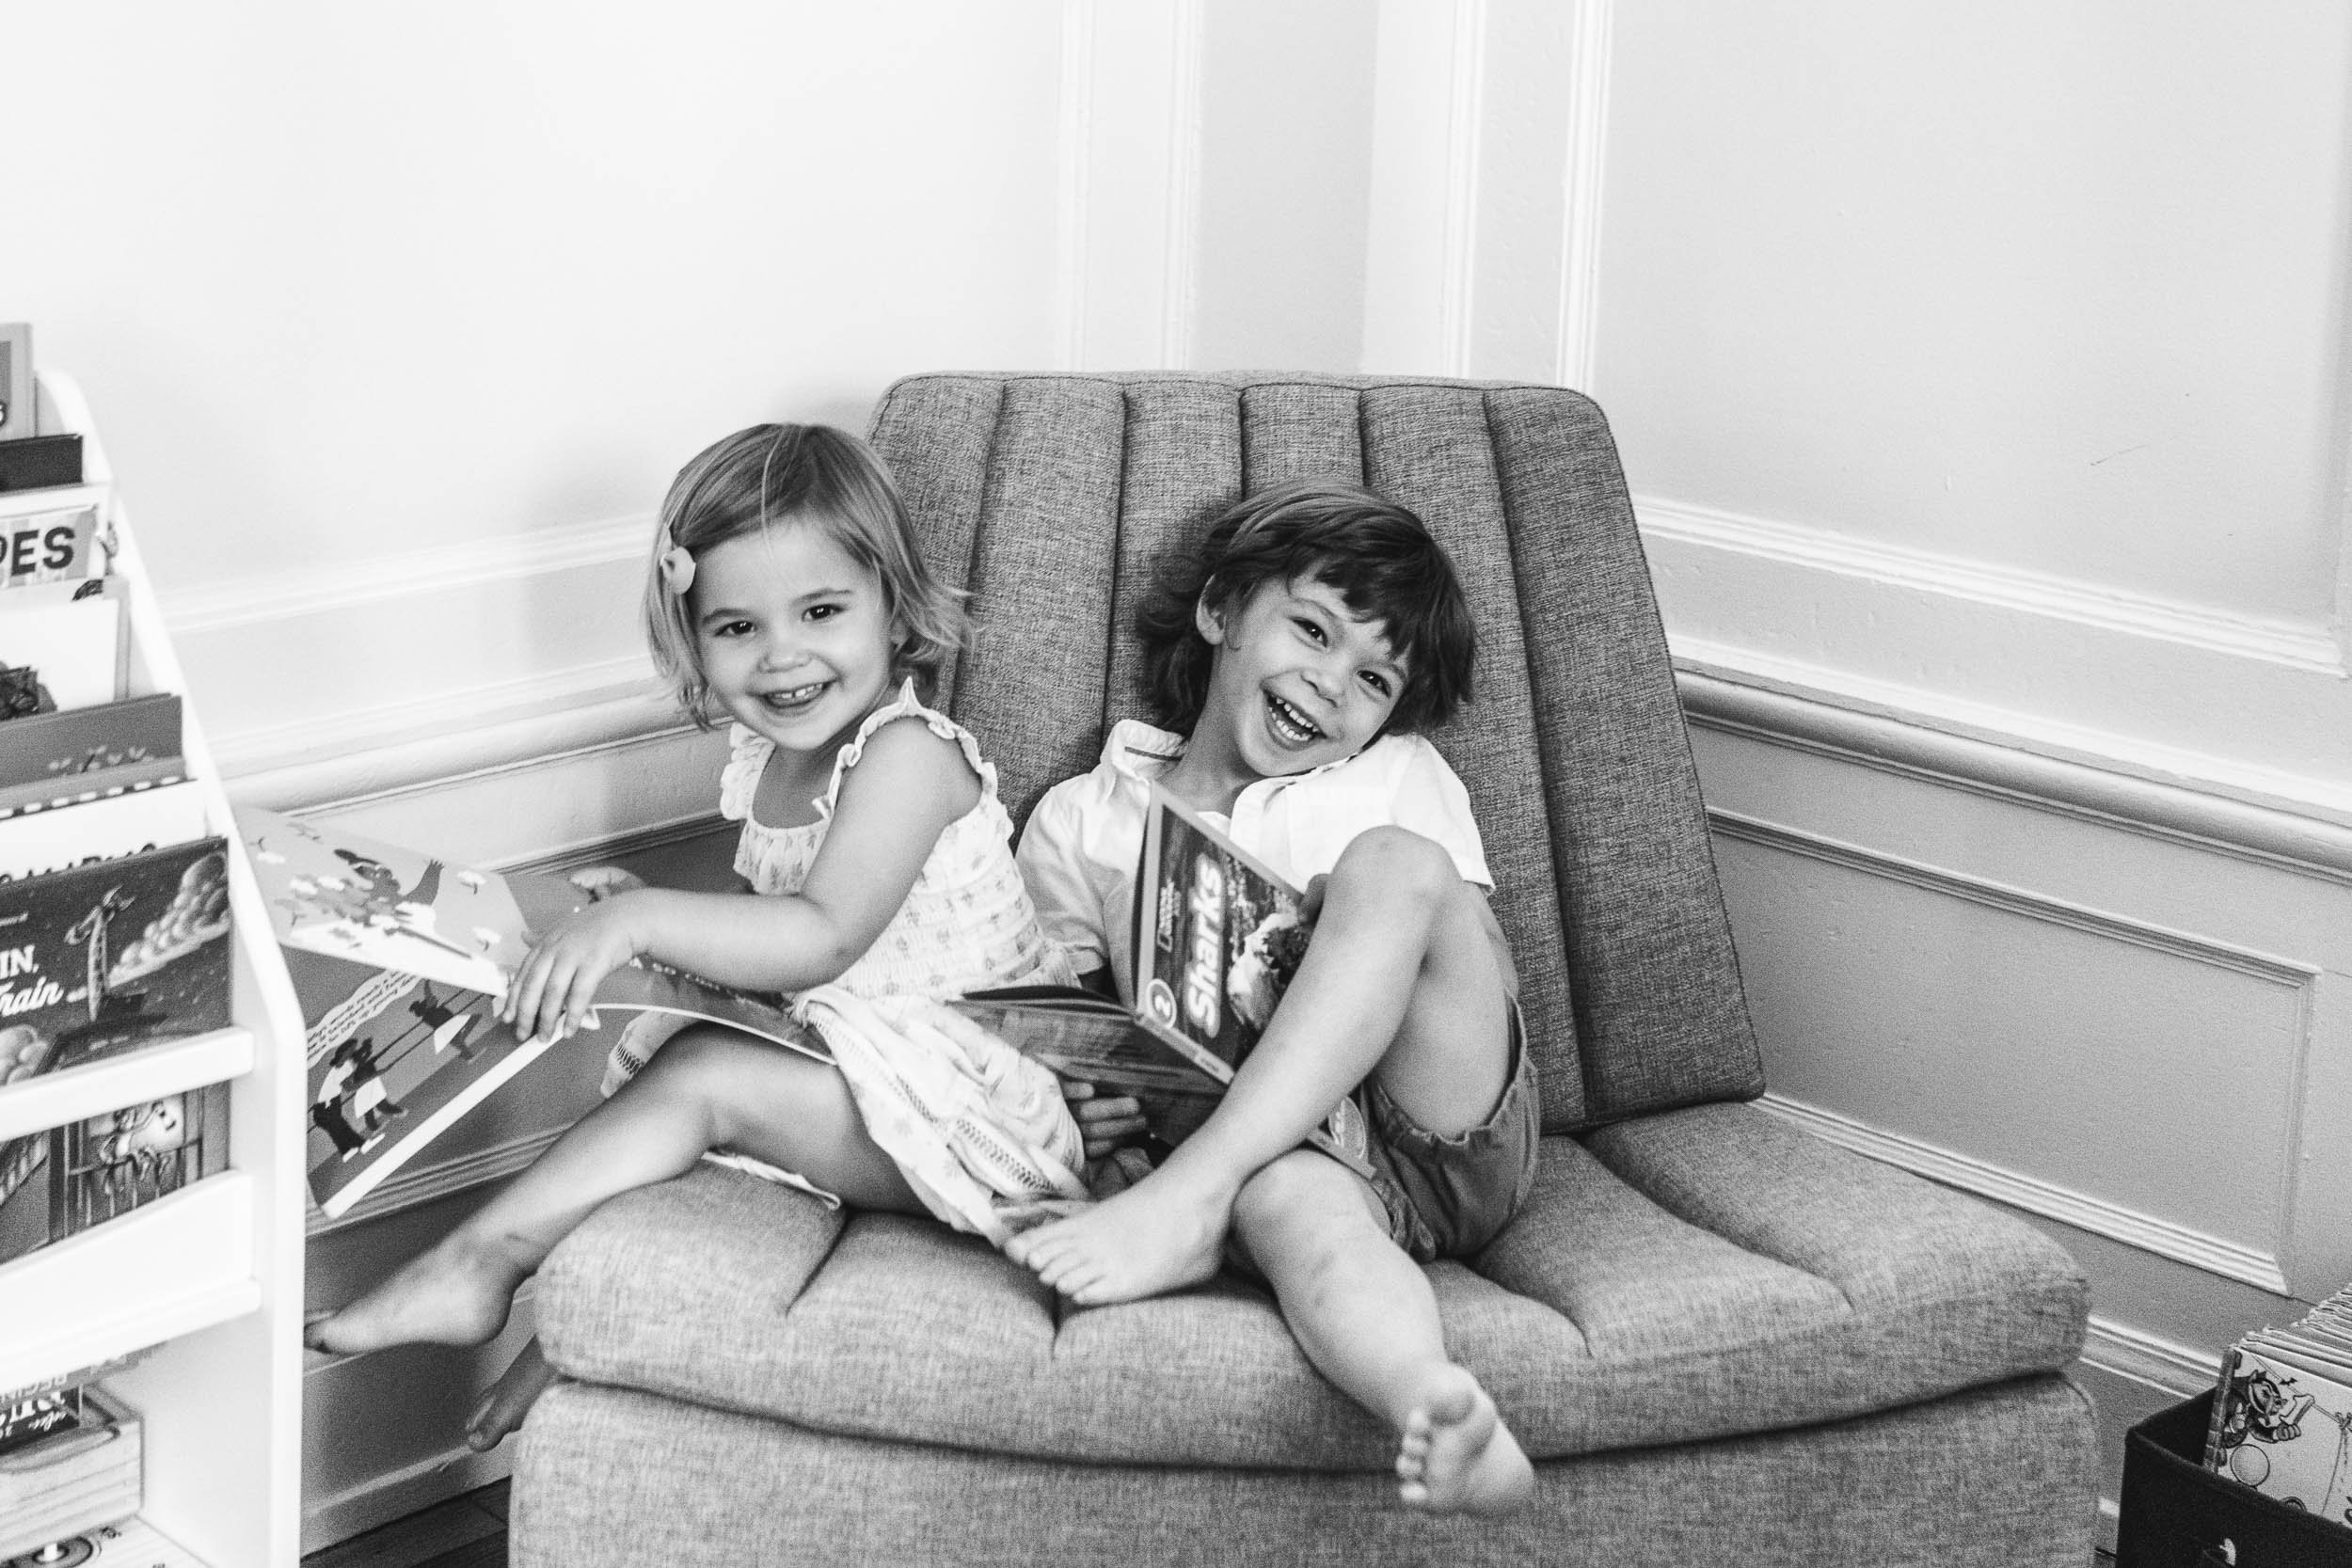  Timeless black and white portrait of a boy and girl sitting on a lounger reading by Nicole Hawkins Photography. modern pic #NicoleHawkinsPhotograaphy #NicoleHawkinsChildren #NewYorkPortraits #KidsinNewYork #ChildrensPortraits #lifestyleportraits 